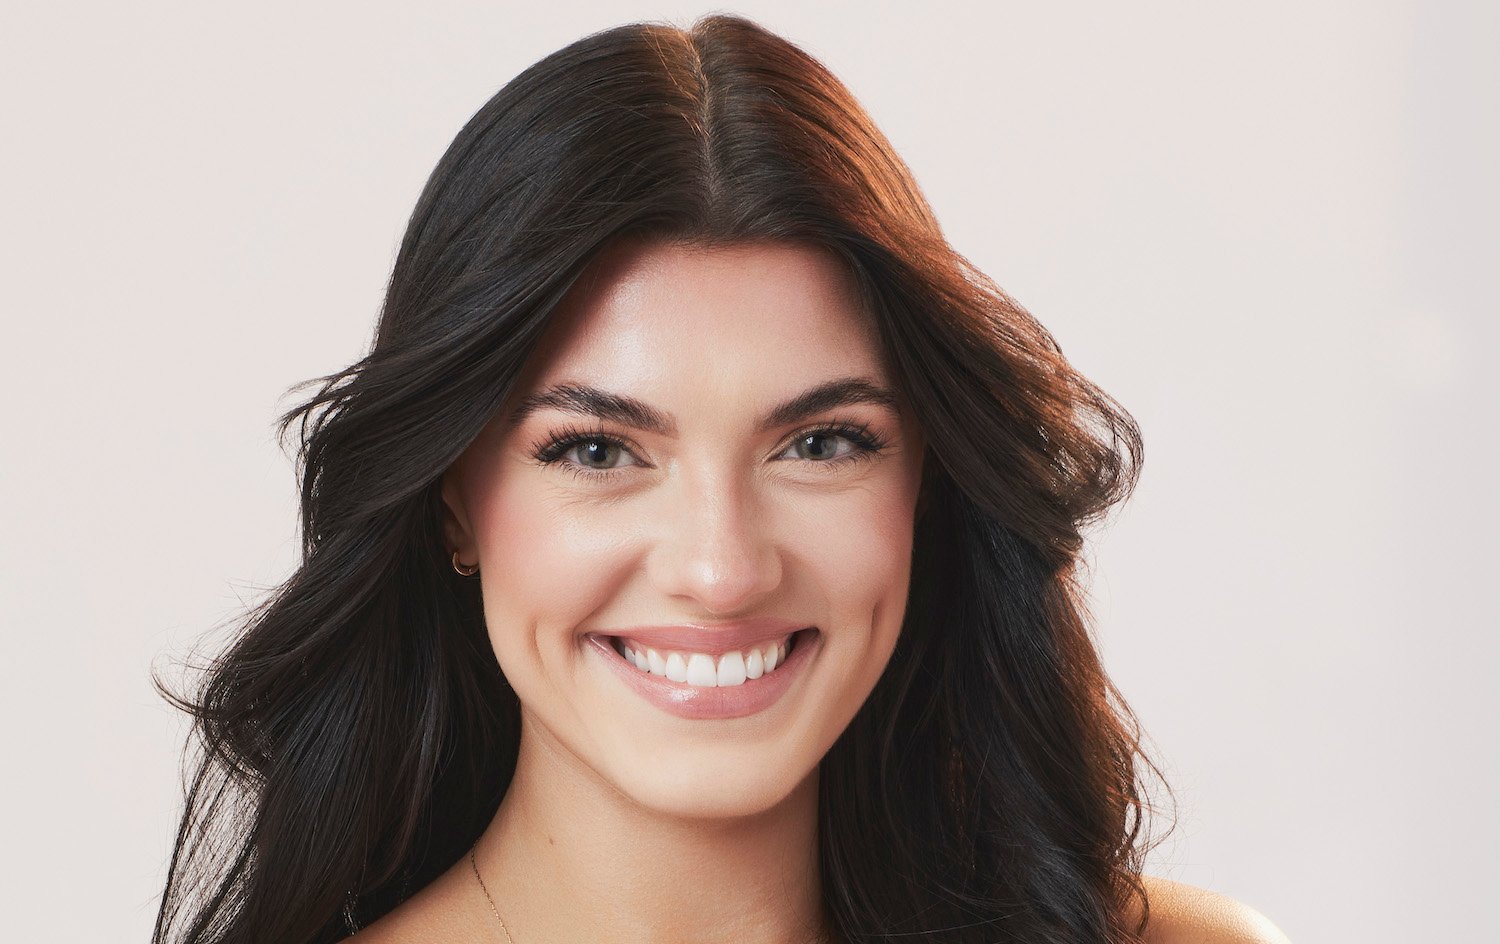 'The Bachelor' star Gabi Elnicki in her official headshot for the series.